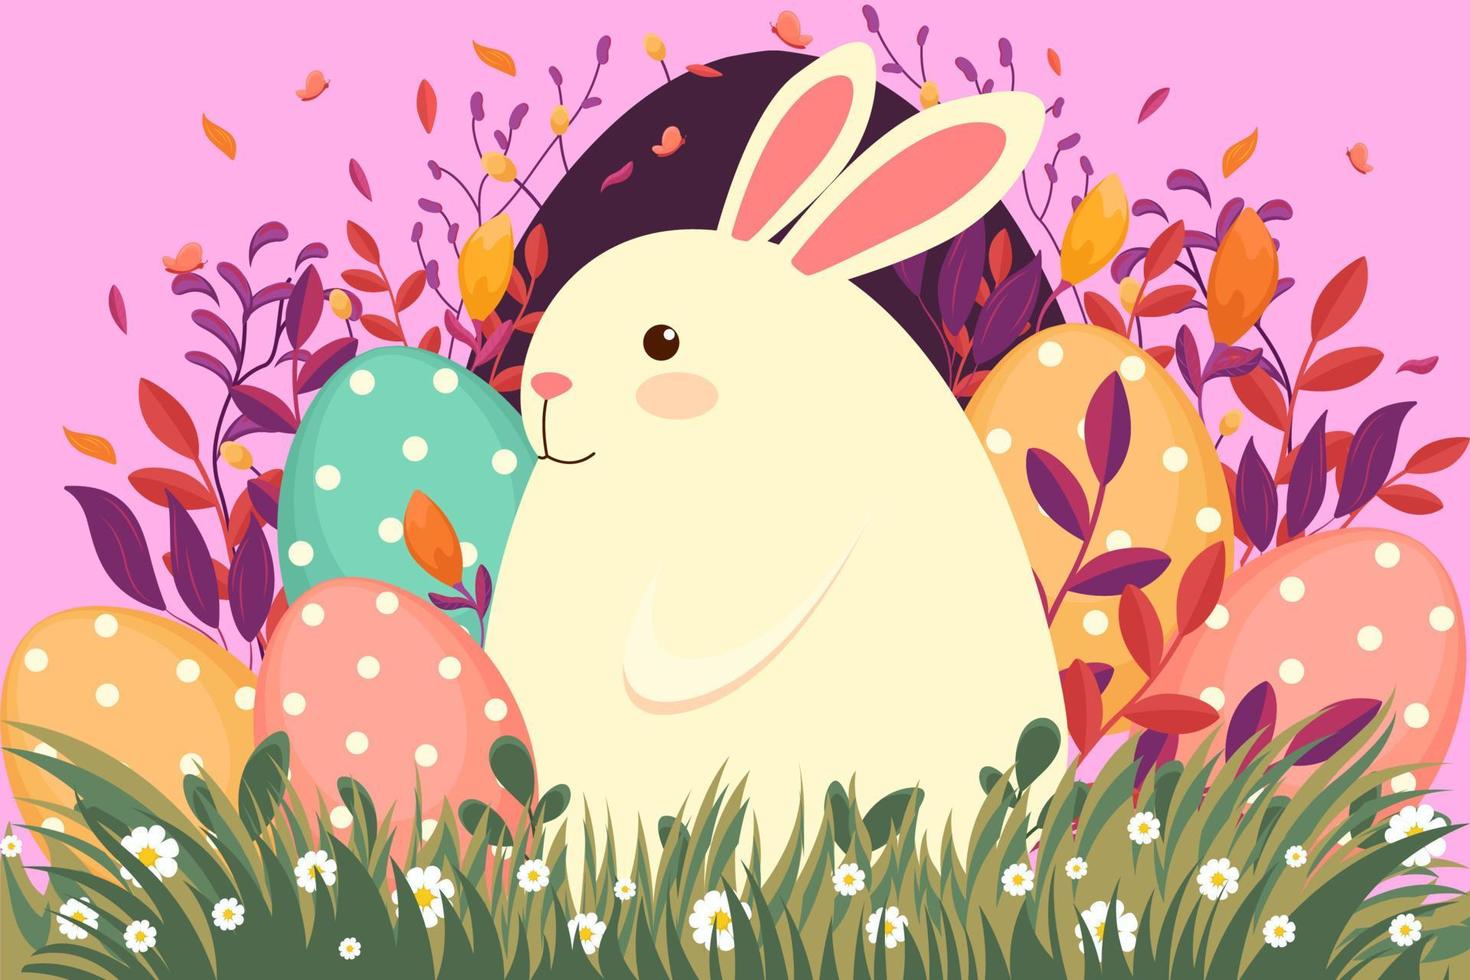 Easter illustration with bunny, flowers, Easter eggs, background, banner or seasonal card, spring illustration, holiday illustration vector